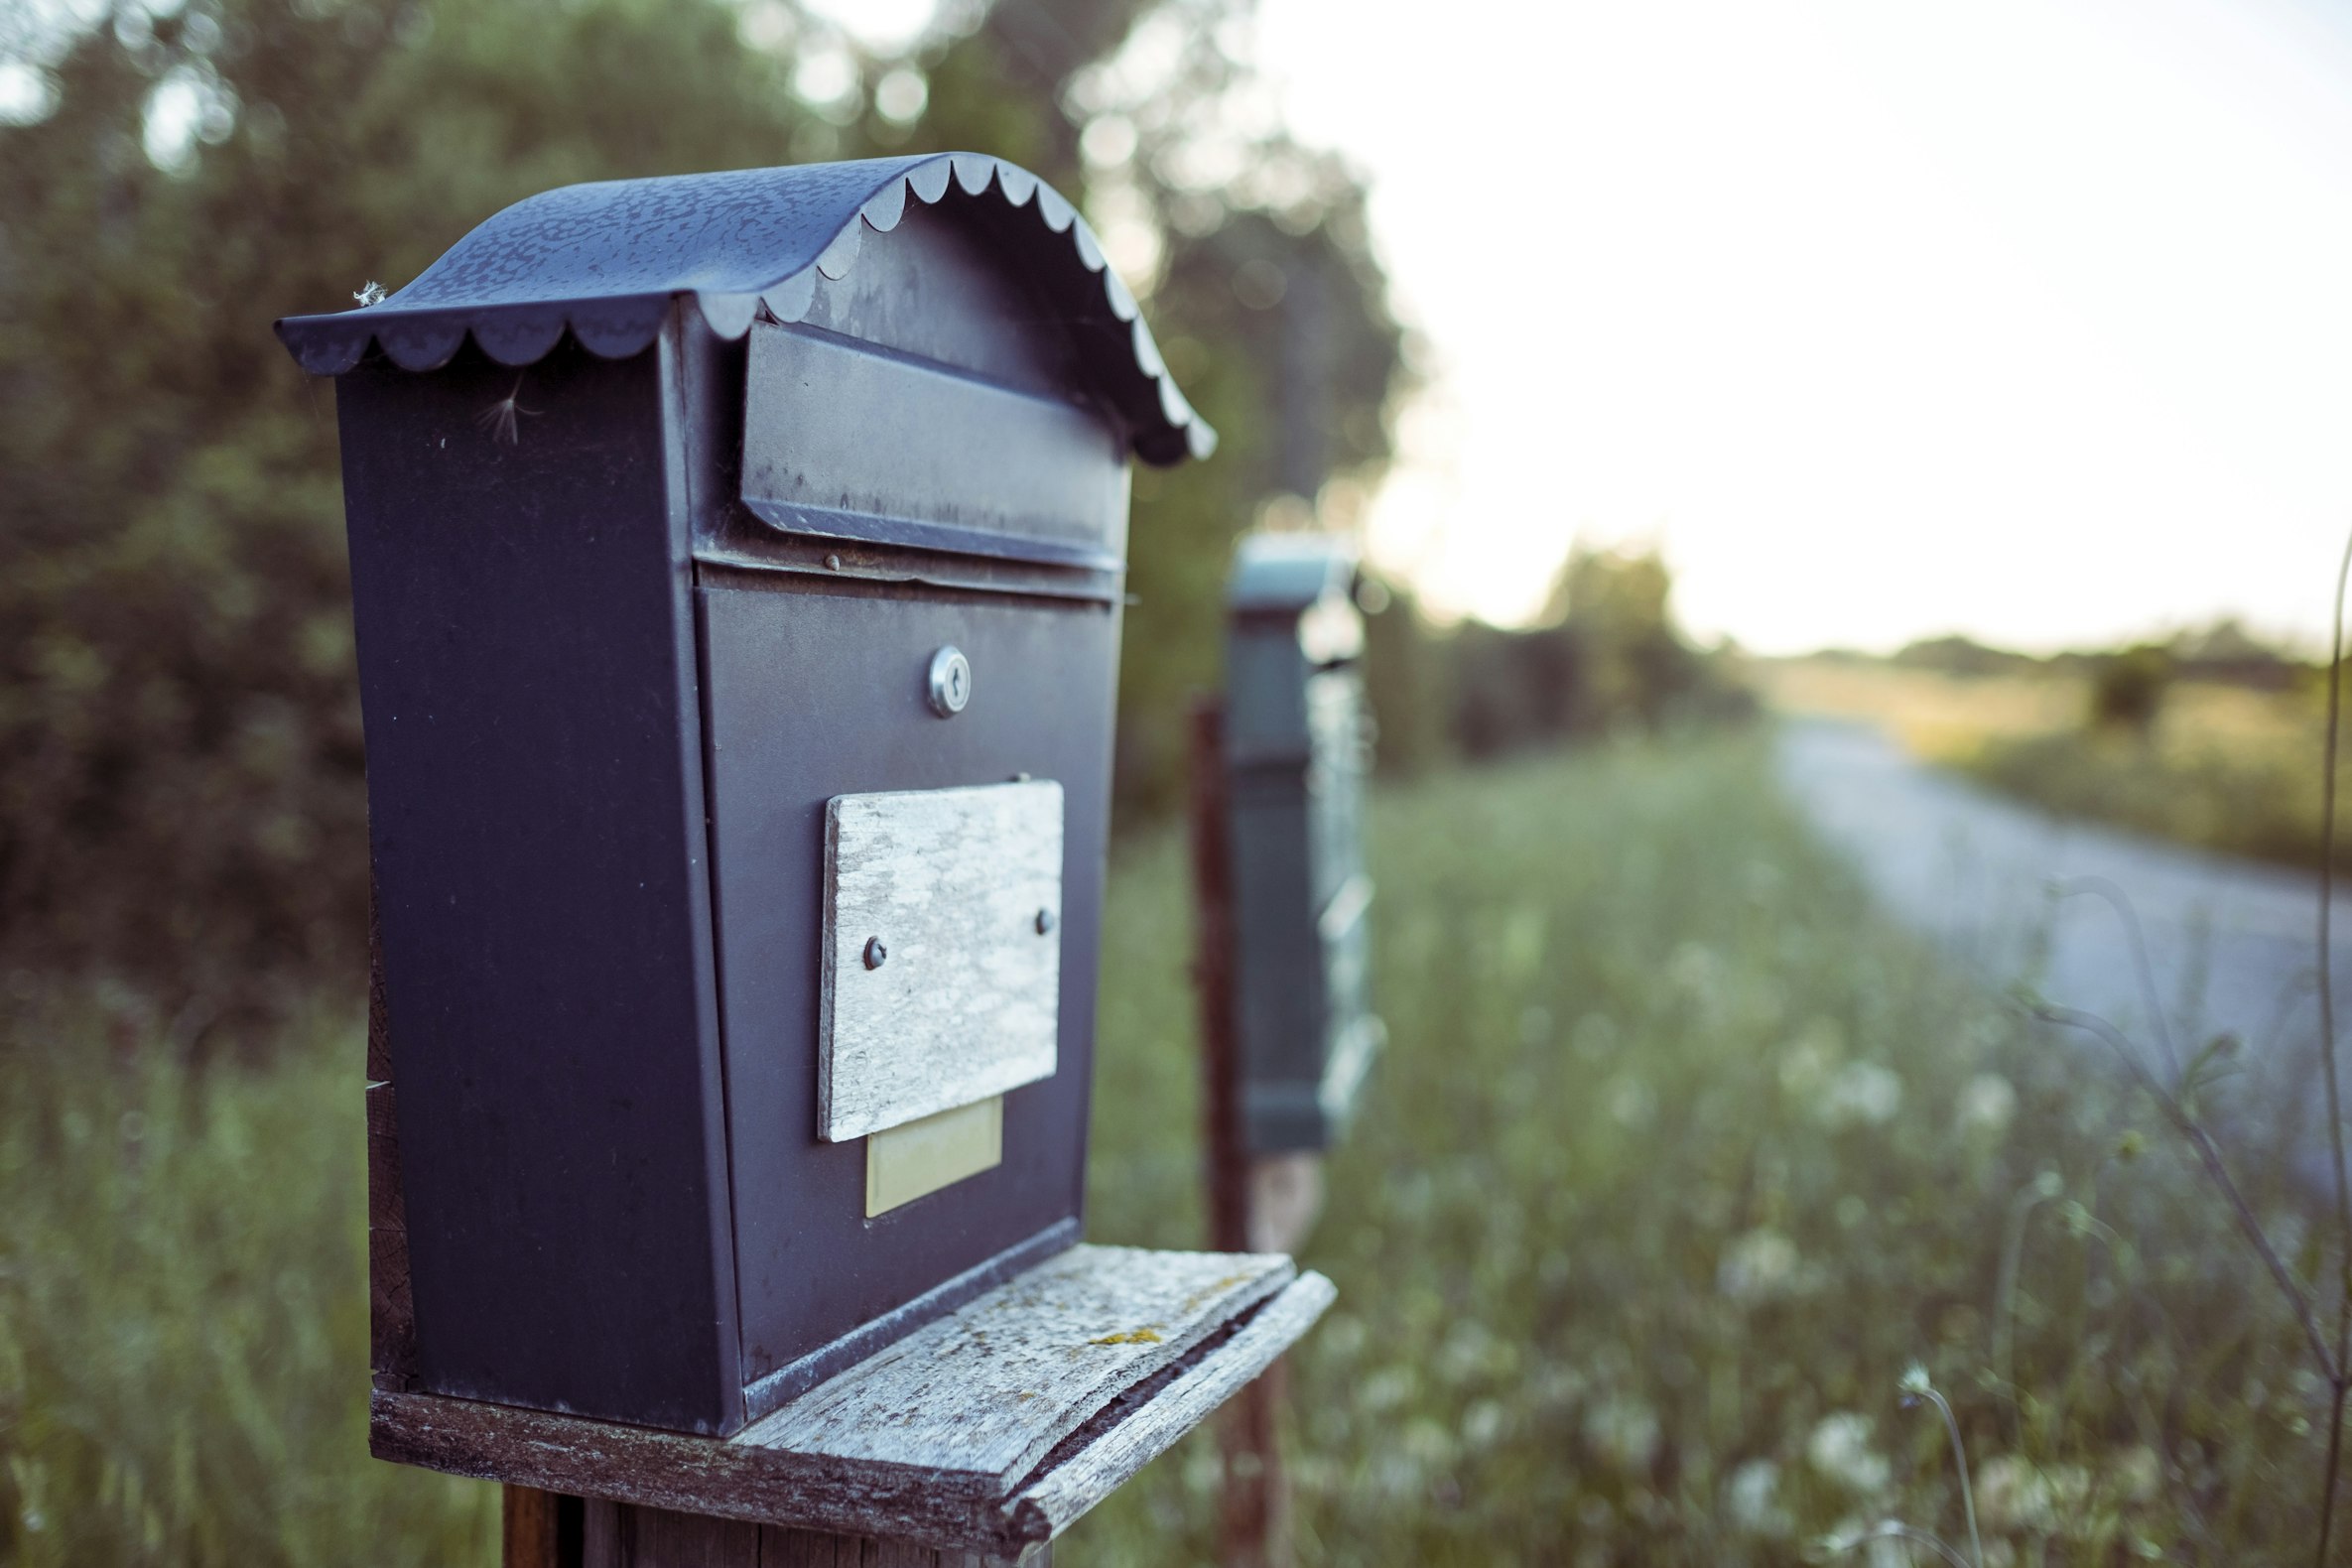 Unsplash image from Davide Baraldi showing a mailbox next to a road.